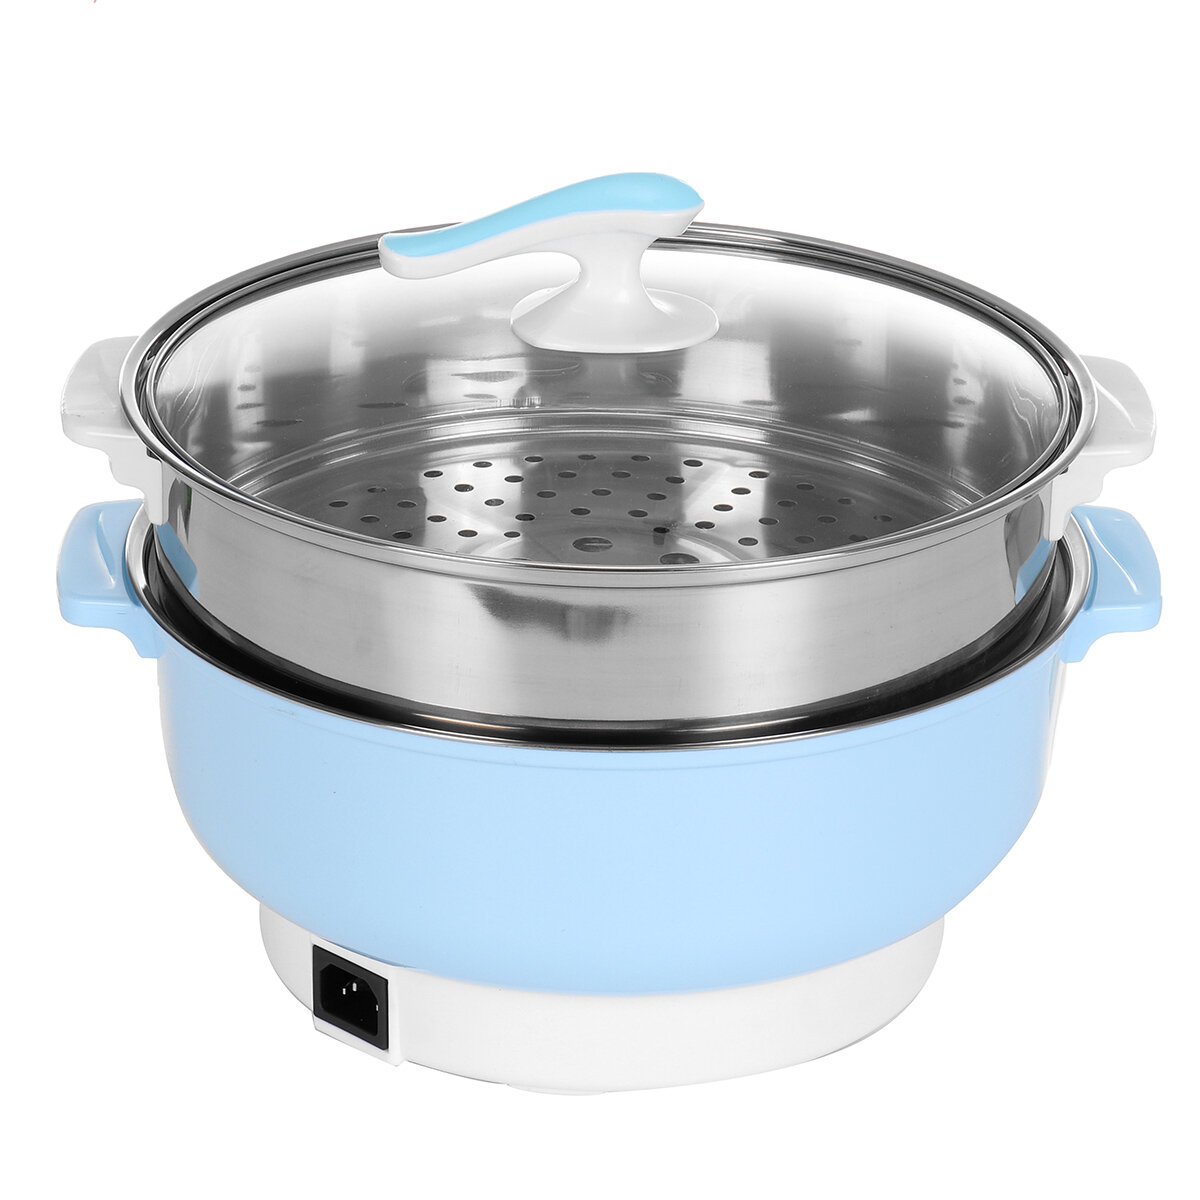 220V Multifunctional Non-Stick Stainless Steel Electric Skillet Hot Pot Steaming Double Gear Double Insulation Protection